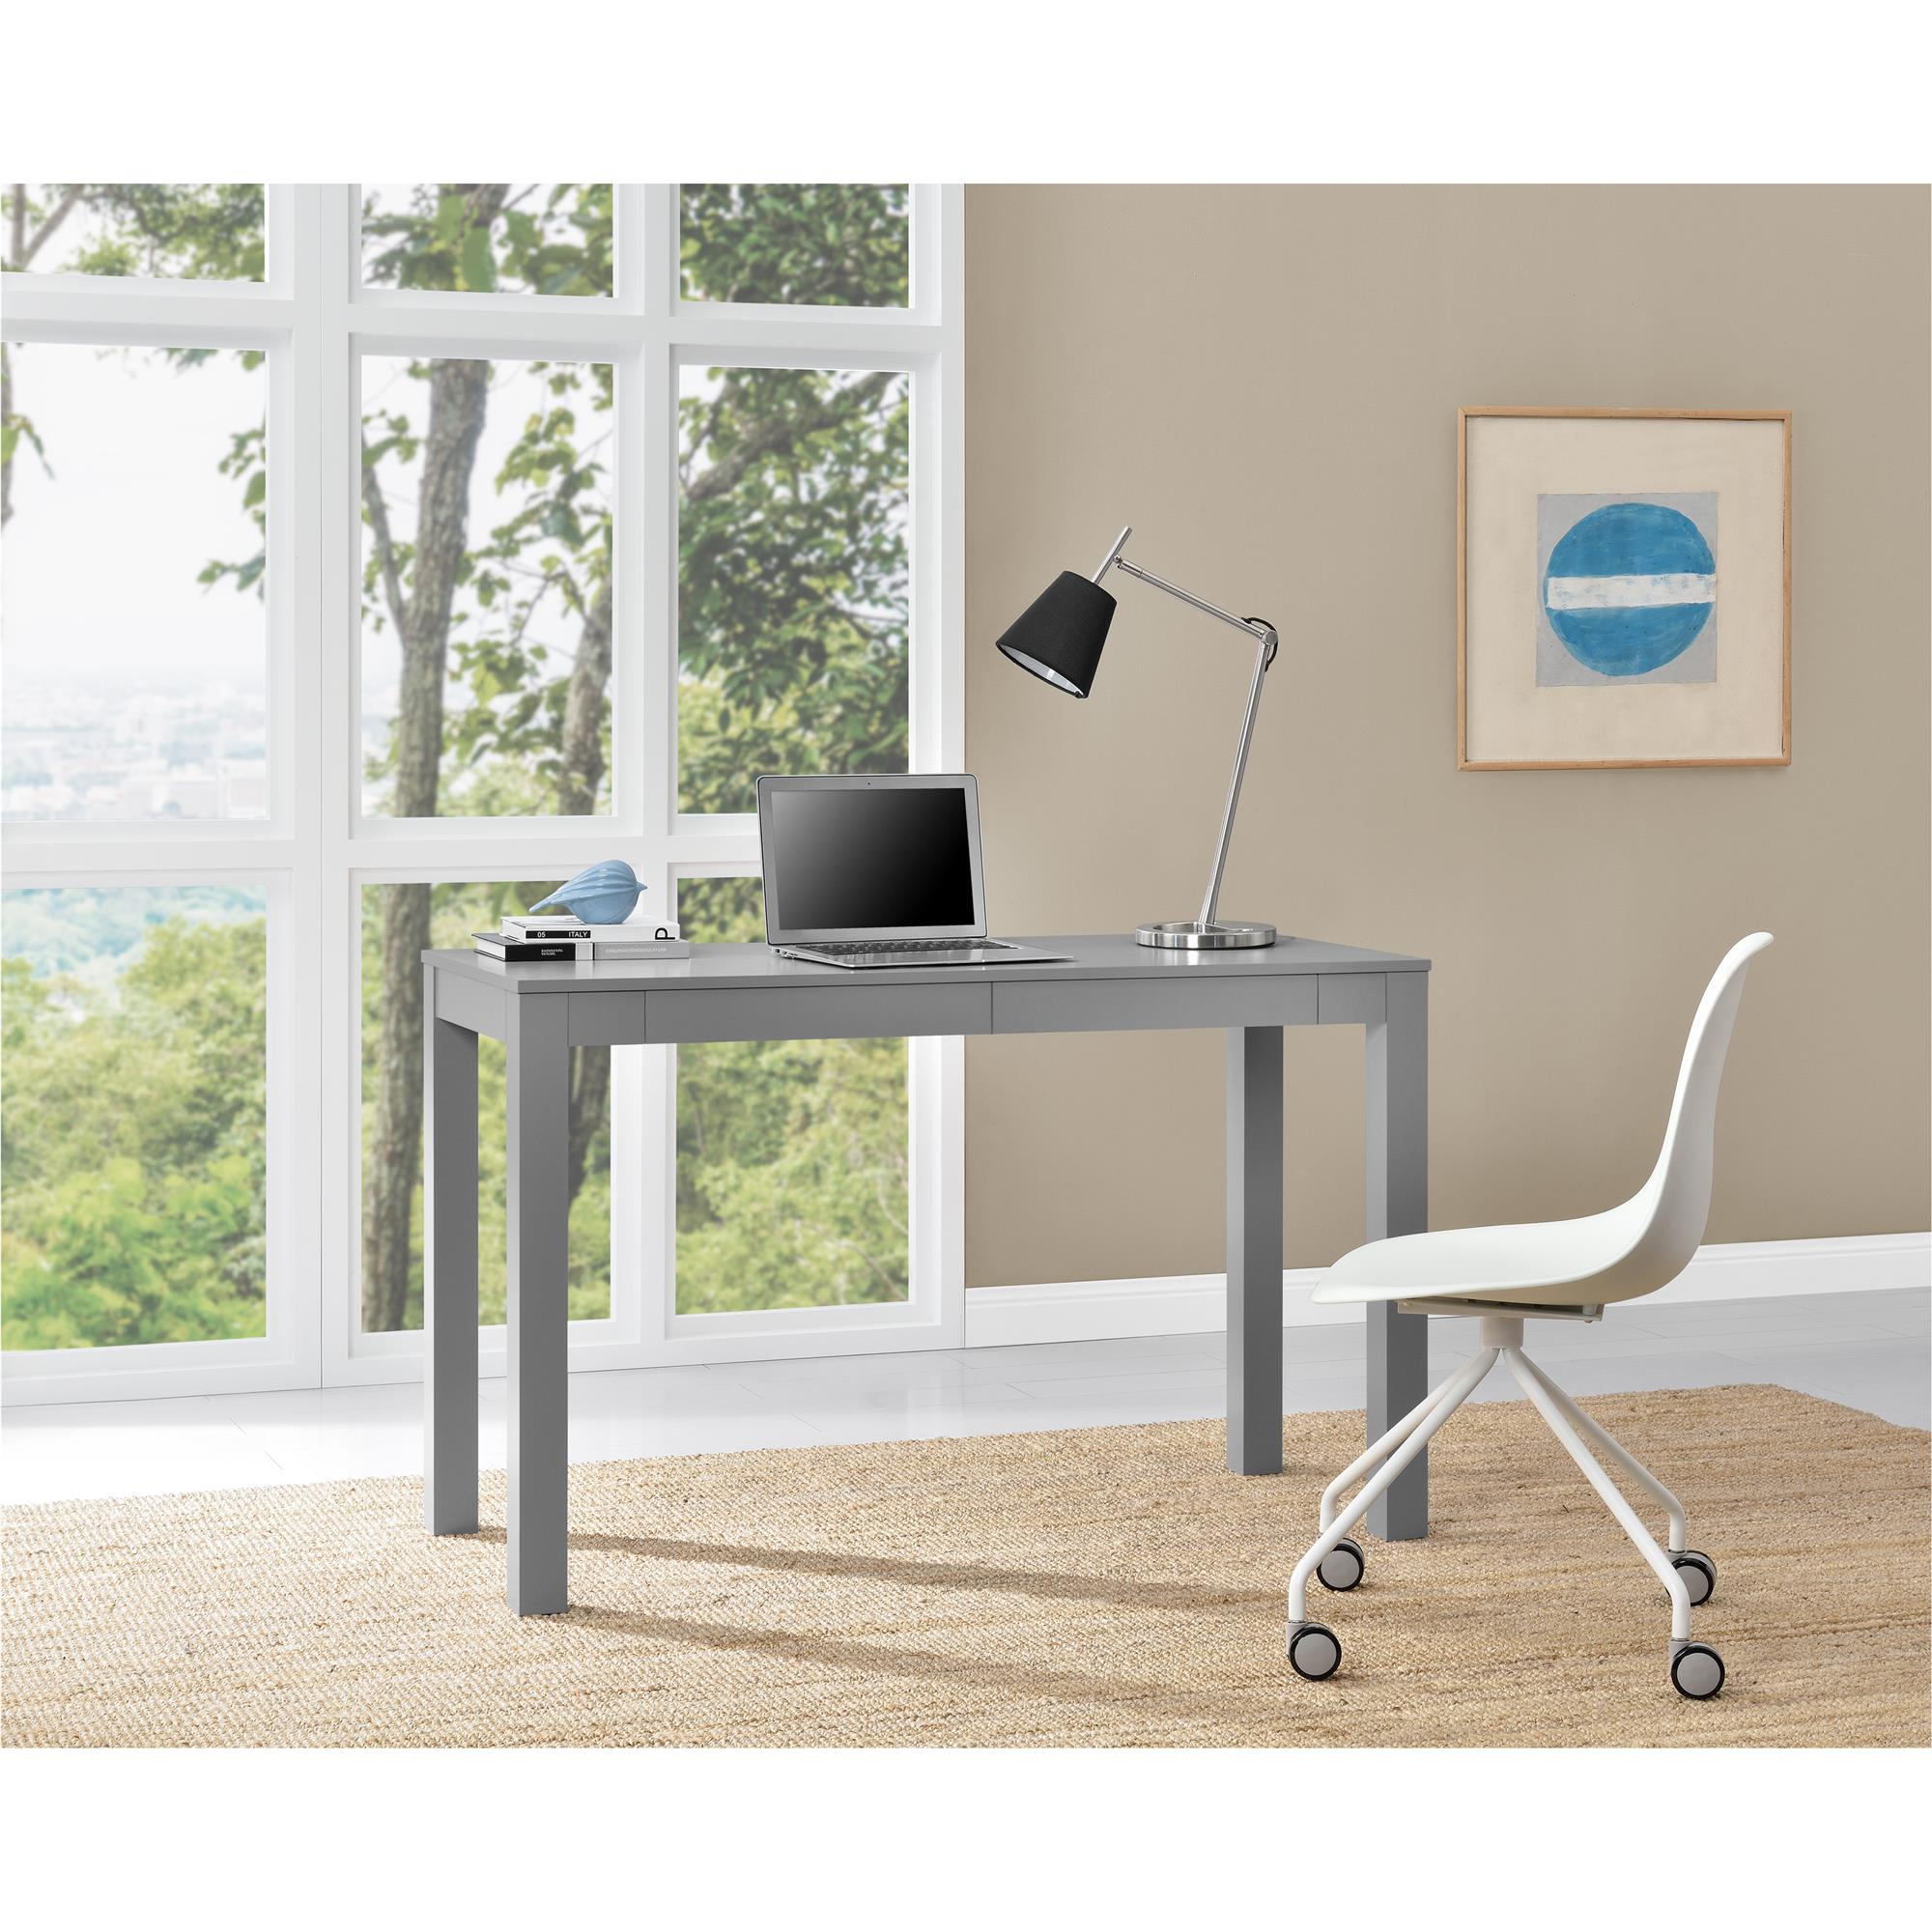 Ameriwood Home Large Parsons Computer Desk with 2 Drawers, Gray - image 1 of 10